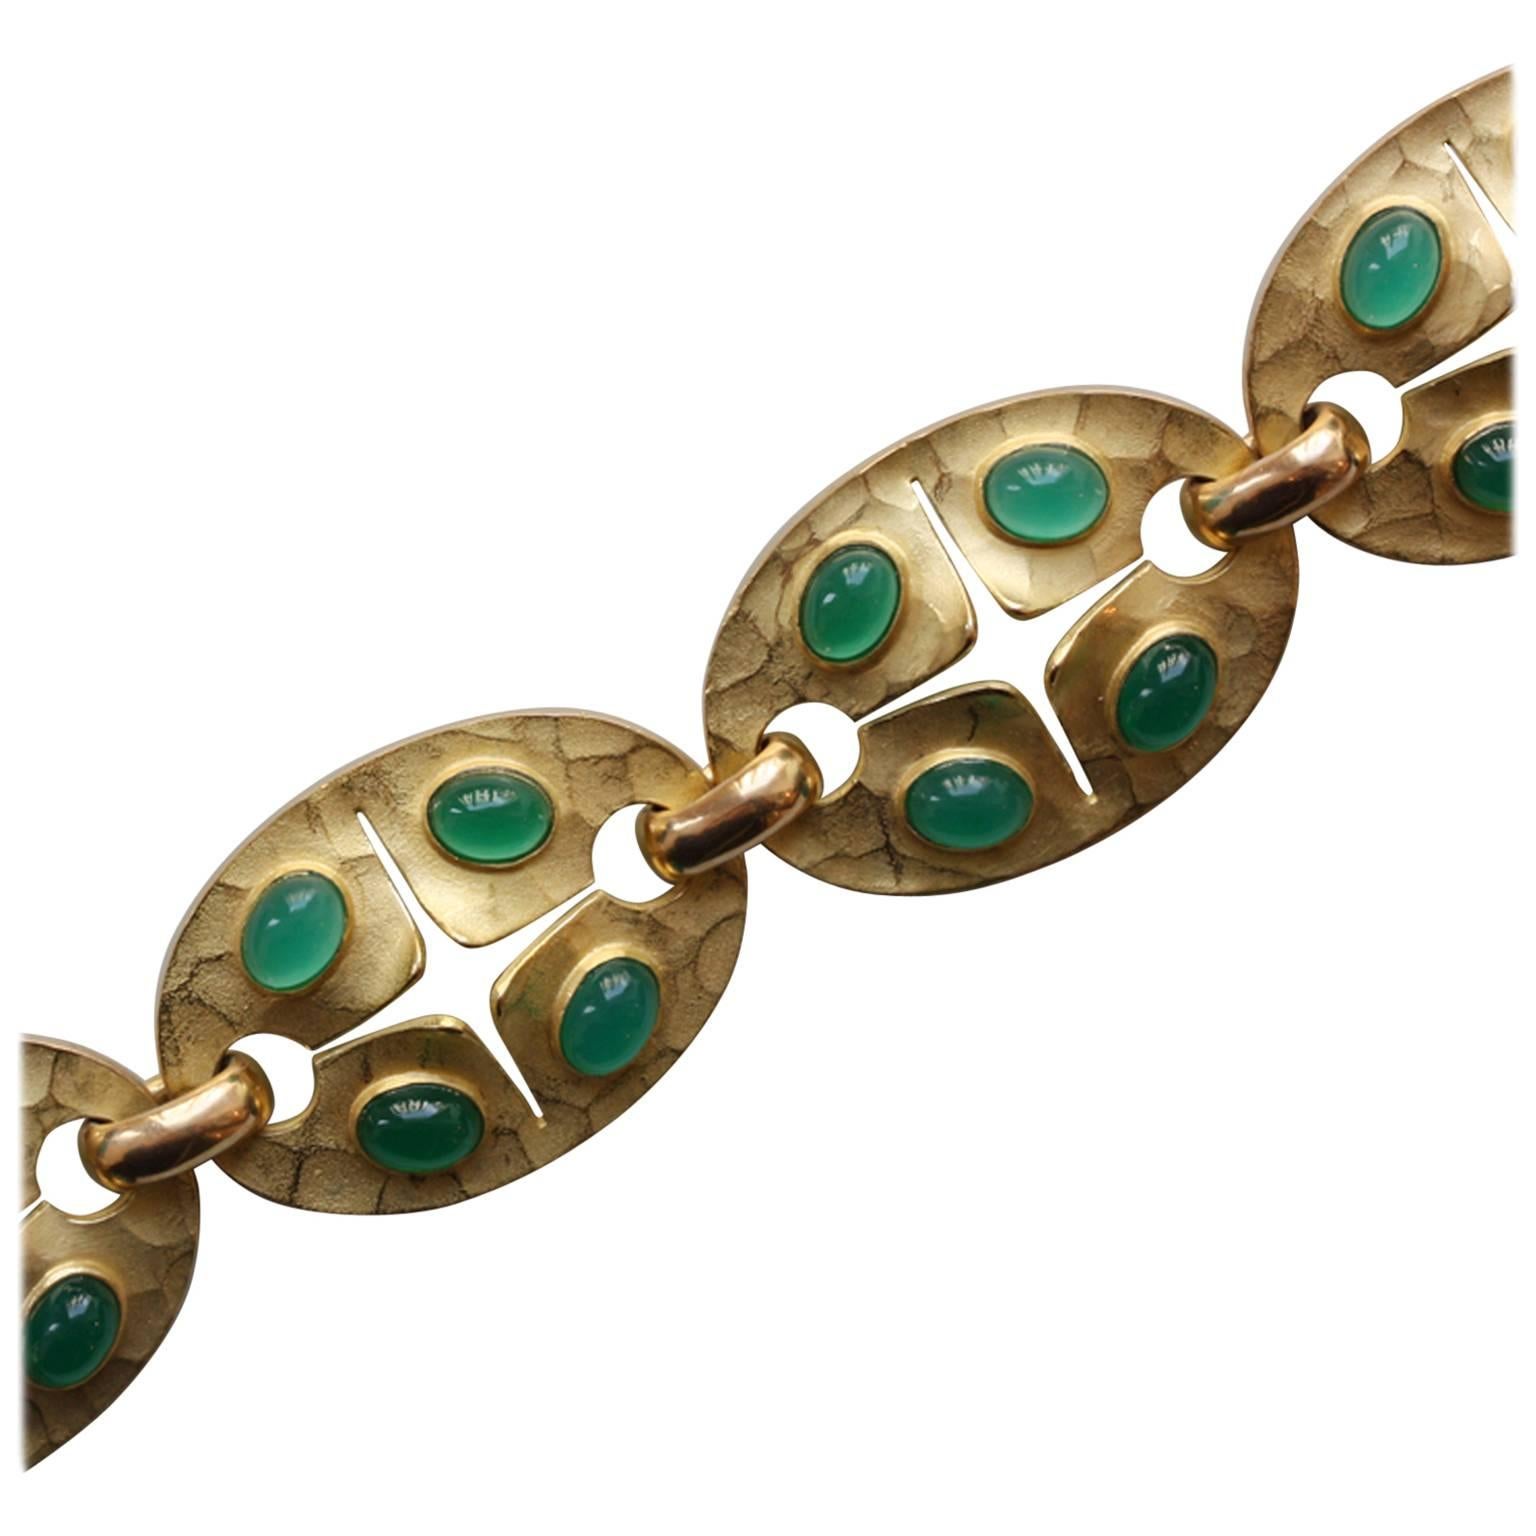 A 18 carat gold and chrysoprase bracelet composed of 6 oval hammered links each set with 4 cabochon cut chrysoprases, Georges Lenfant, circa 1970.

weight: 47.5 grams
dimensions: 20 x 2.3 cm